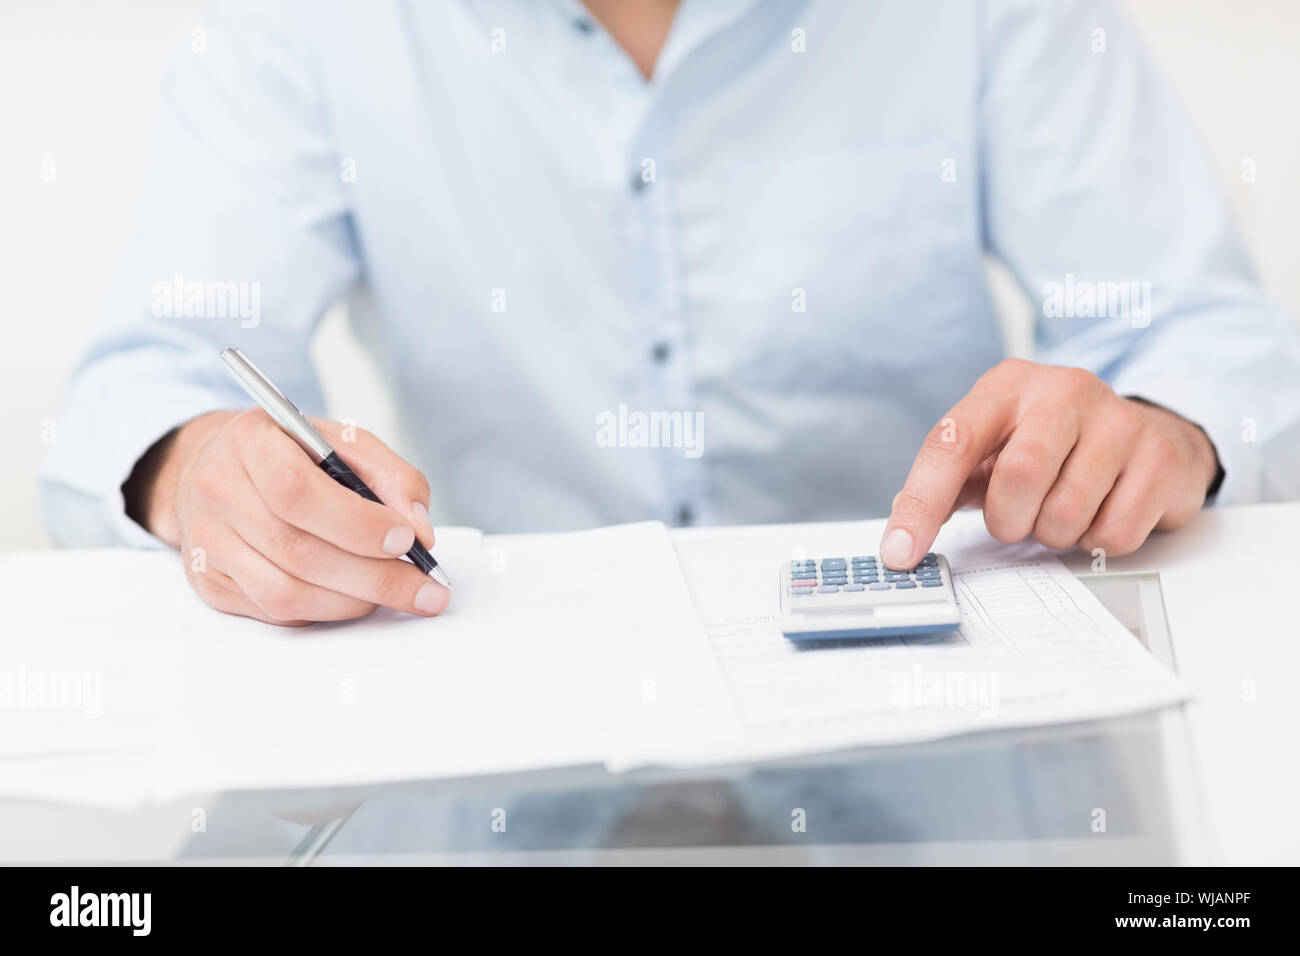 Mid section of a young man with bills and calculator Stock Photo